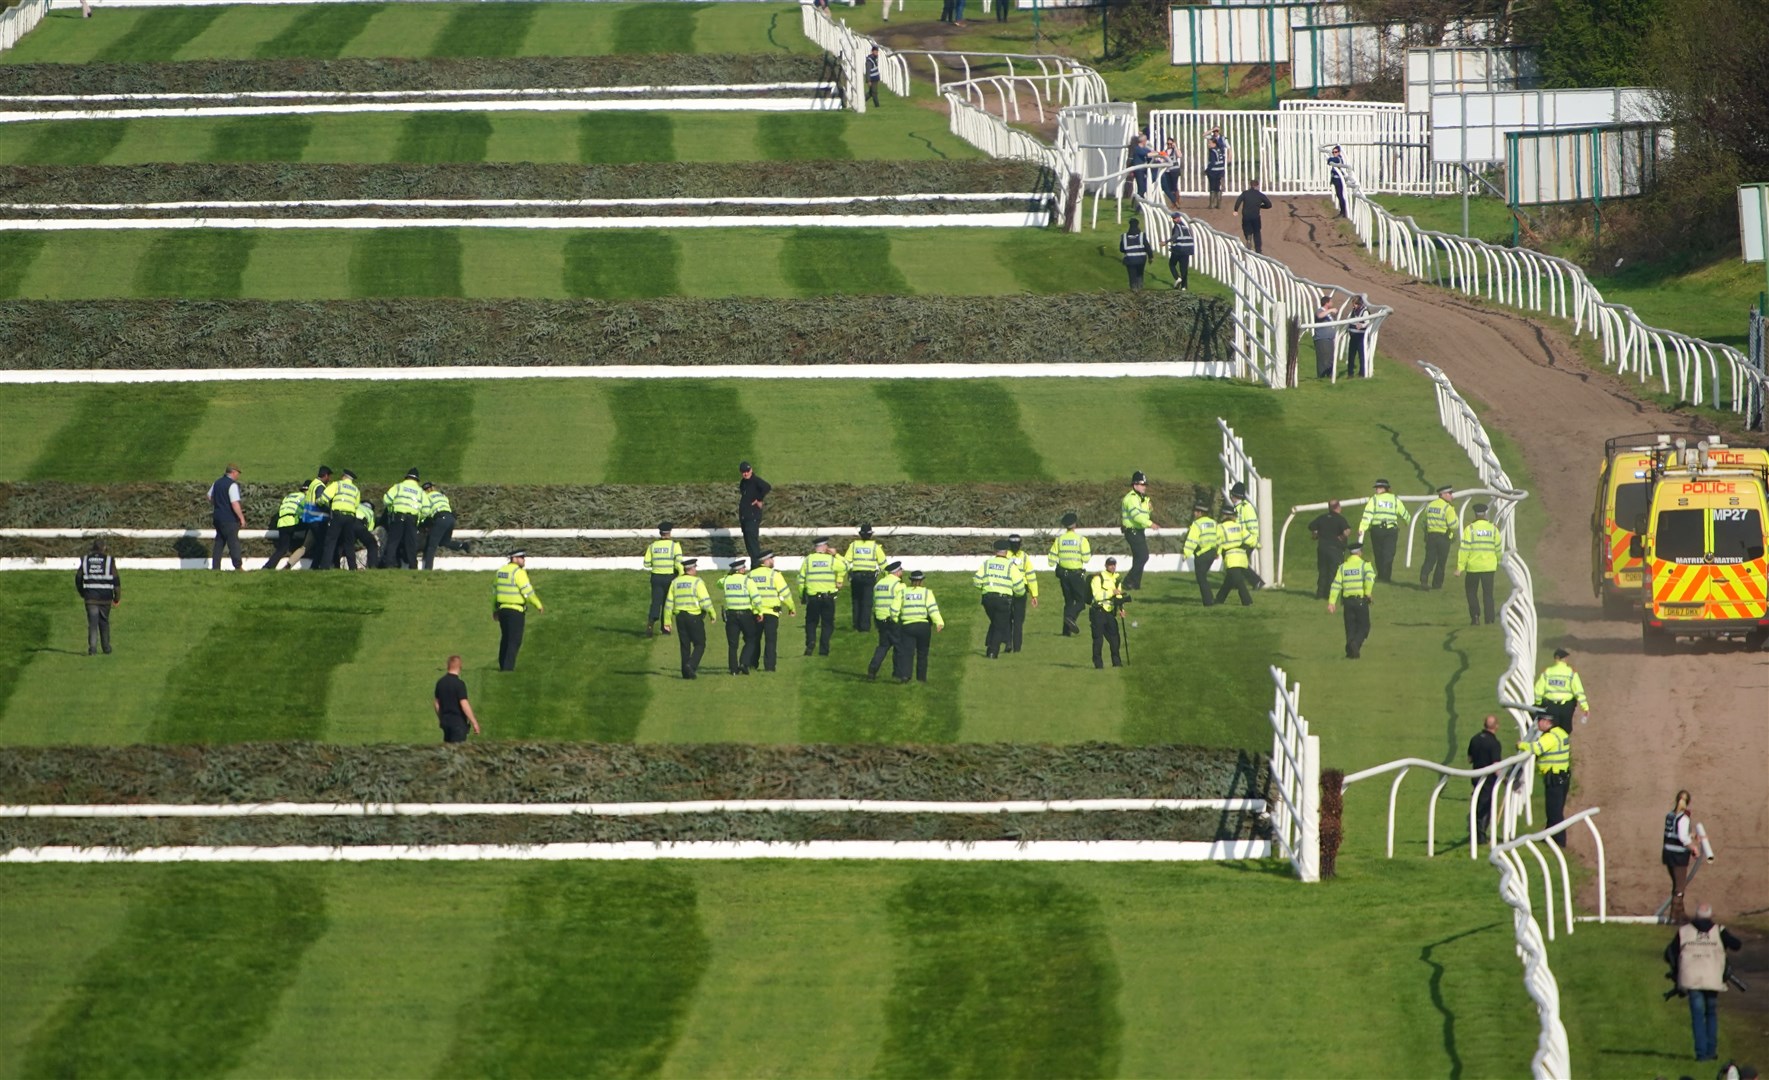 Police officers respond to Animal Rising activists attempting to invade the race course ahead of the Grand National on Saturday (PA)